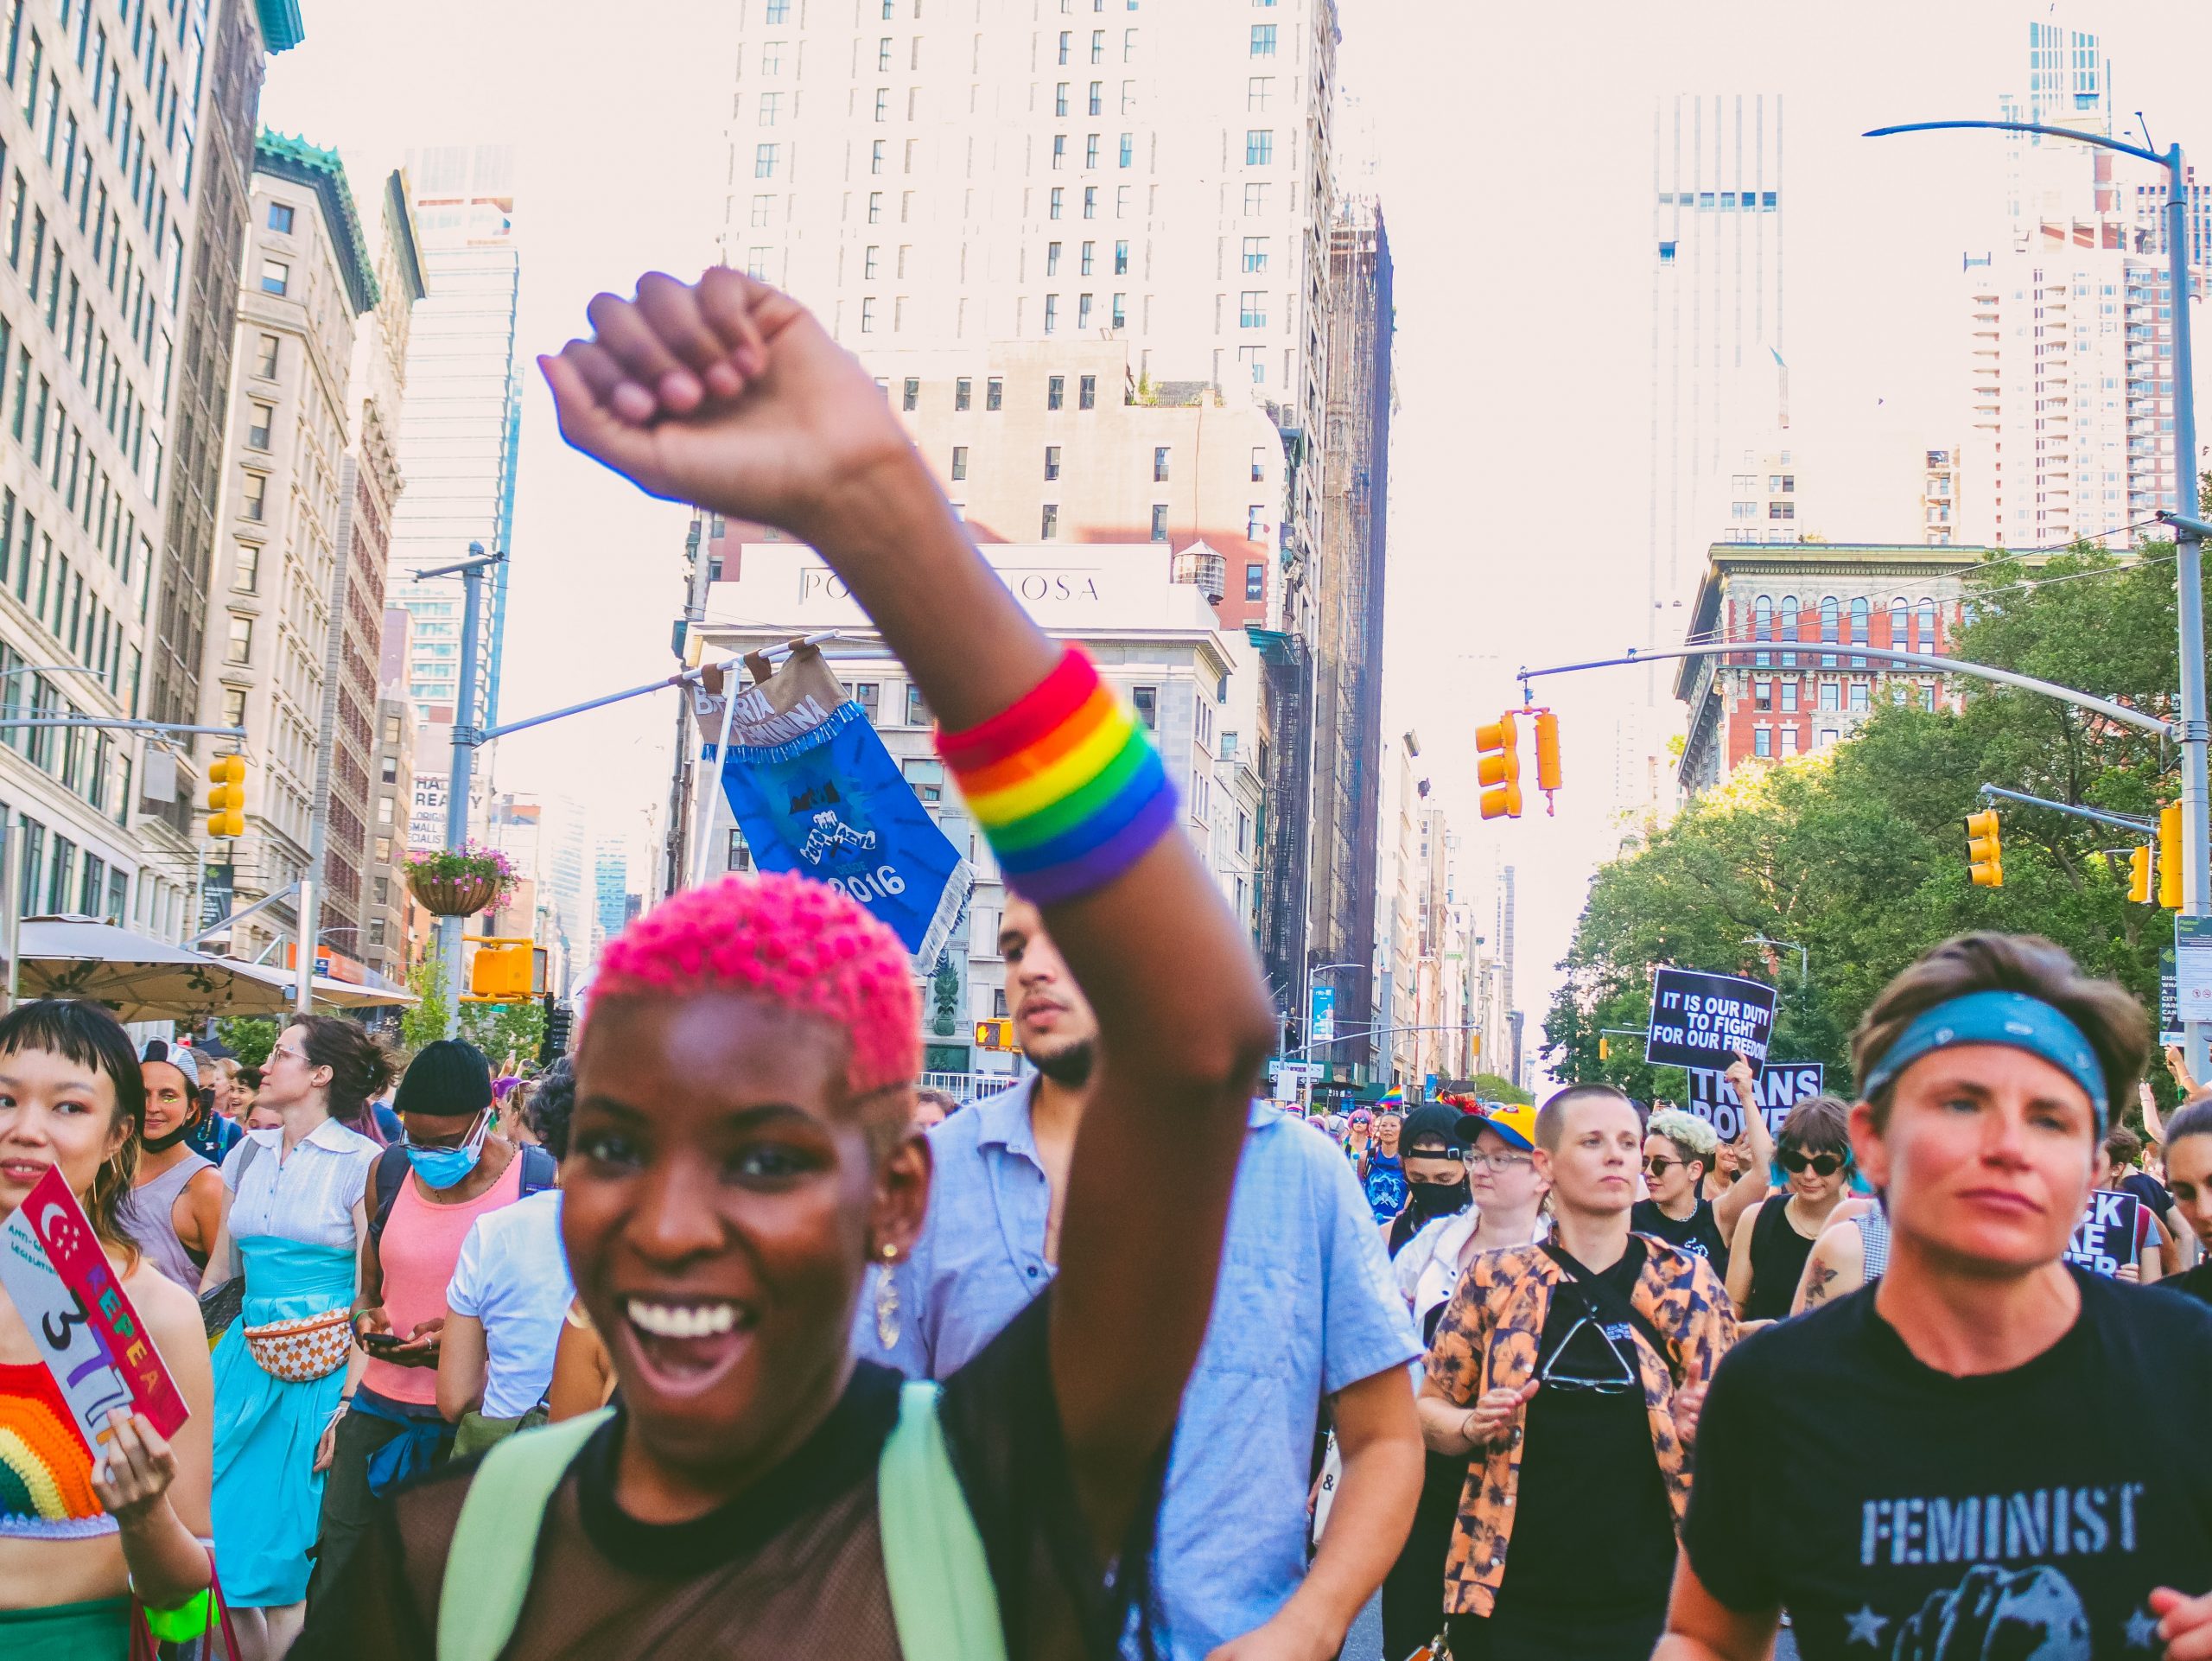 A pride parade, a person holds their fist up with a rainbow wristband.